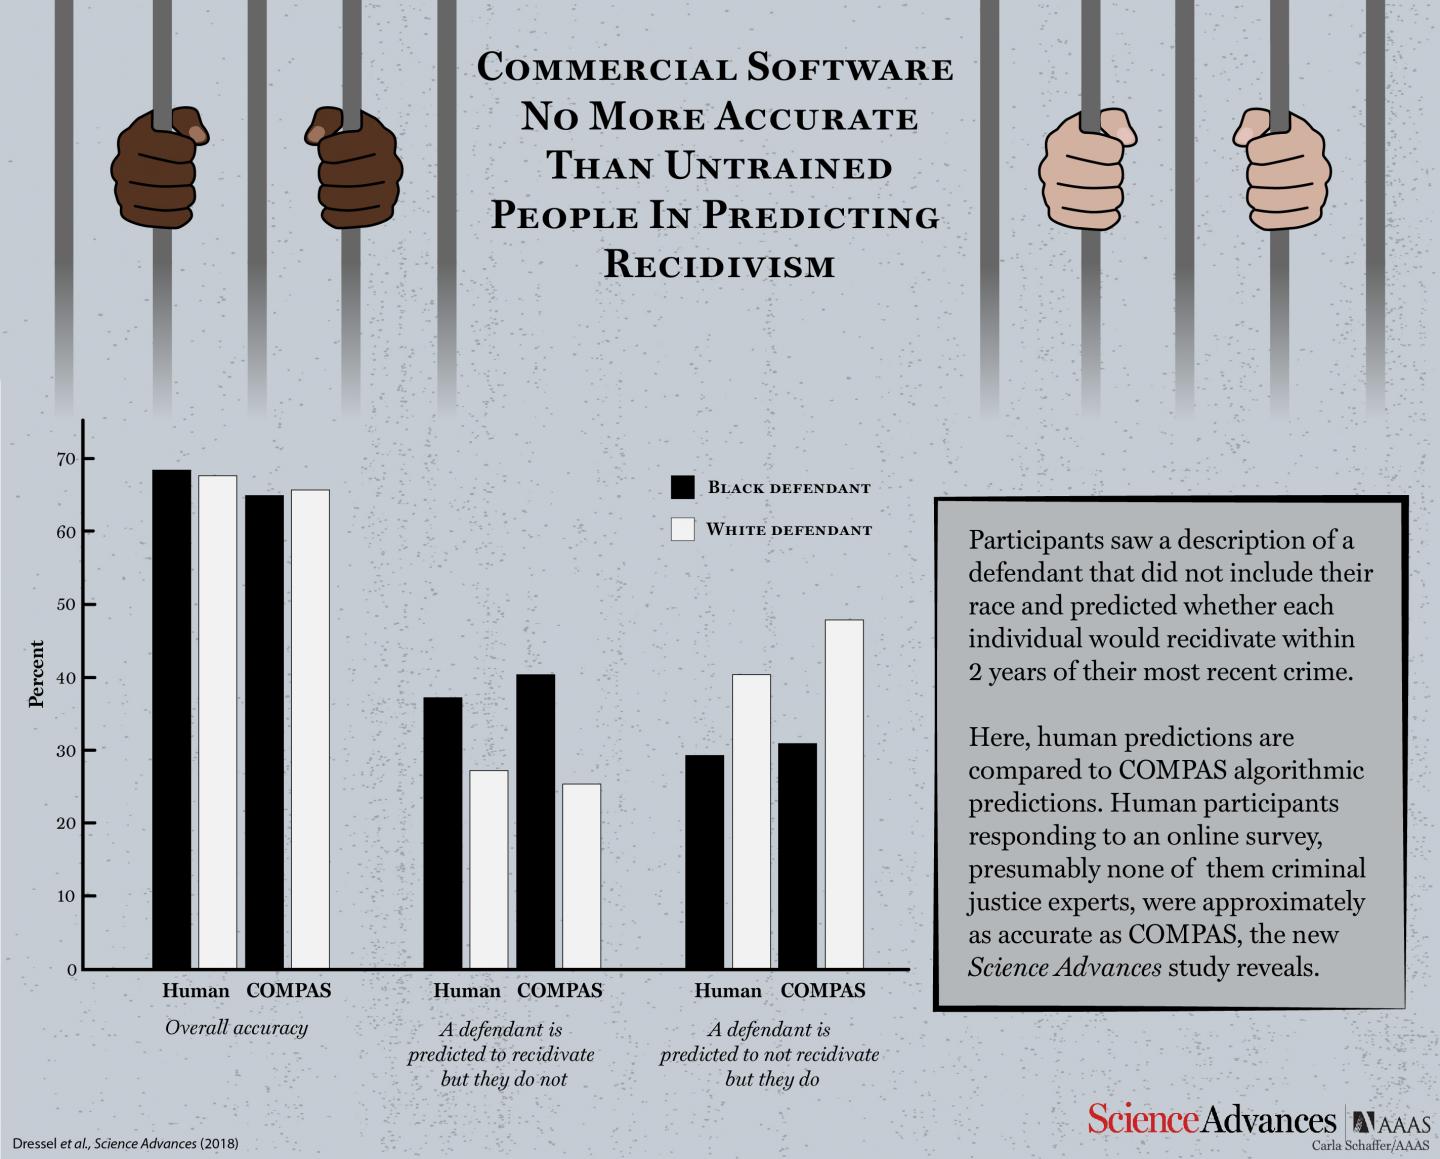 Commercial Software No More Accurate Than Untrained People in Predicting Recidivism